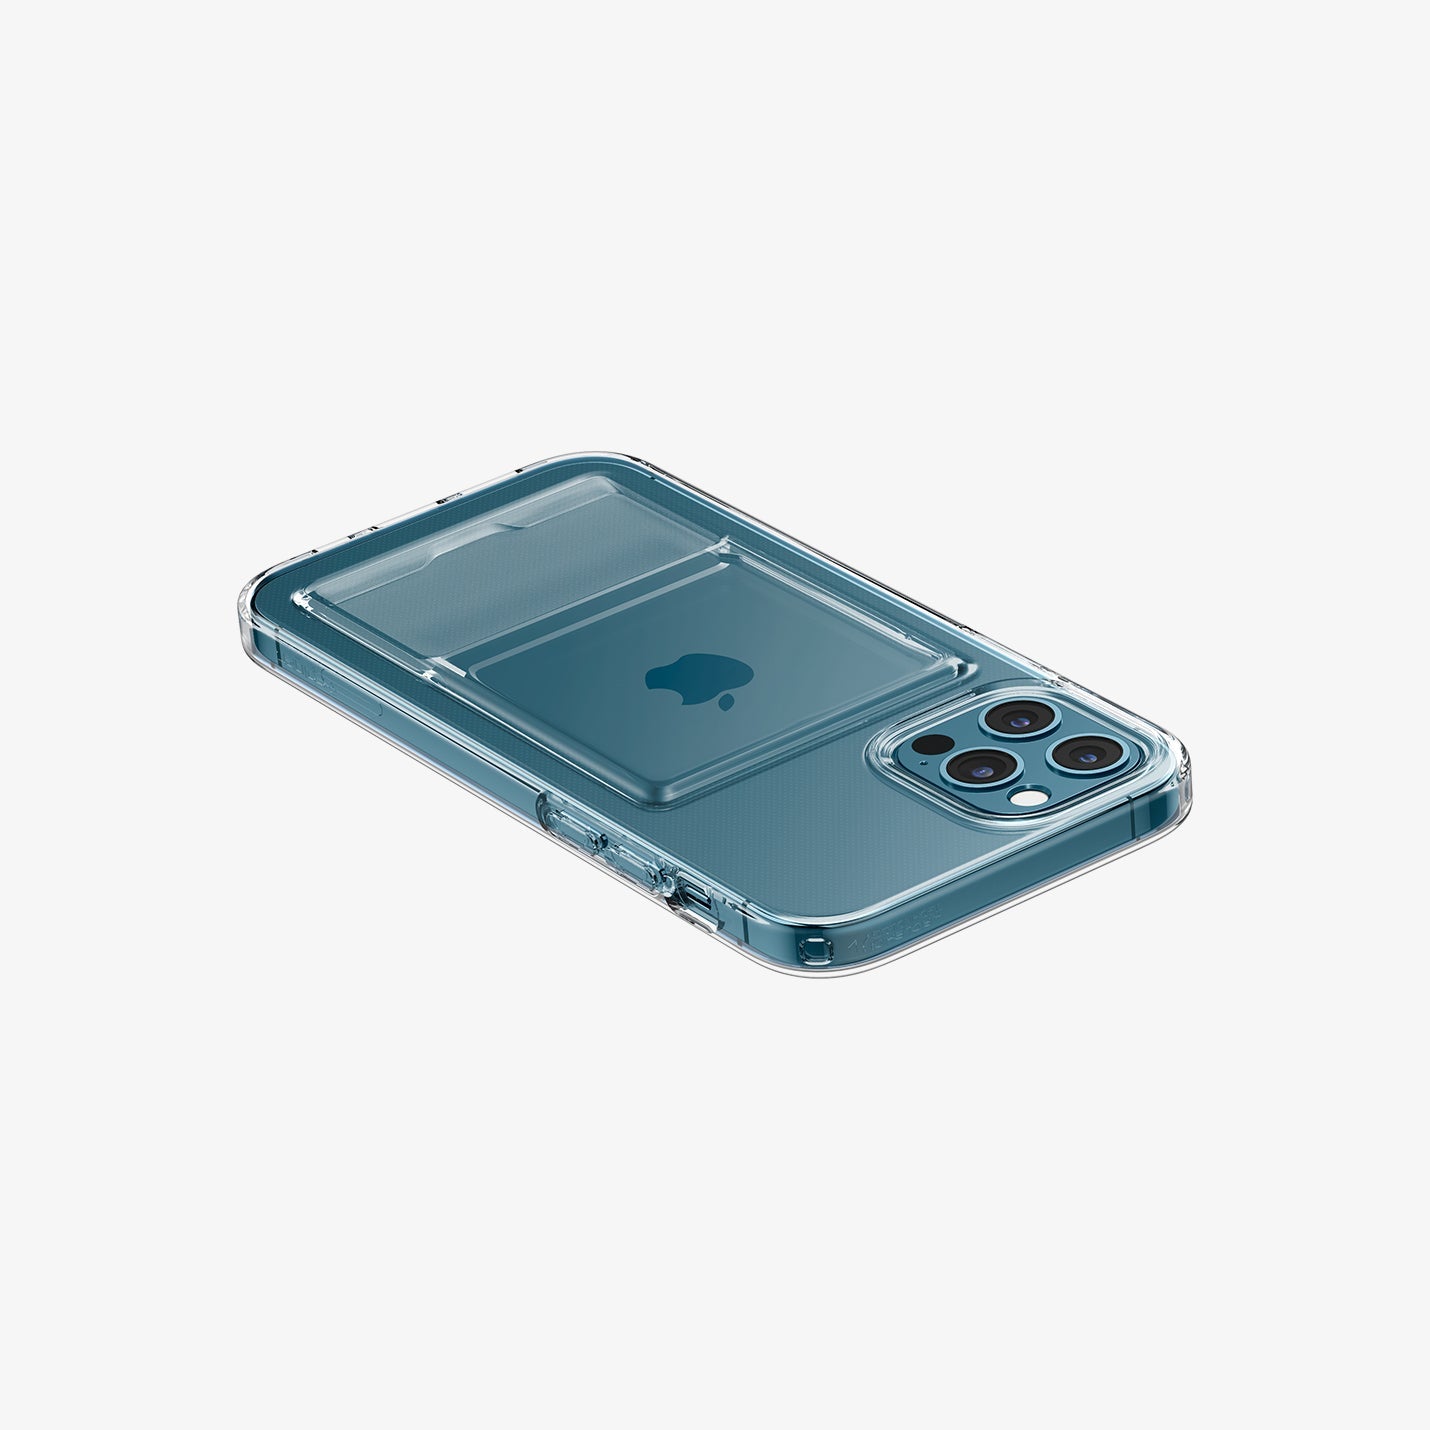 ACS02576 - iPhone 12 / iPhone 12 Pro Case Crystal Slot in crystal clear showing the back, side and top with device laying flat